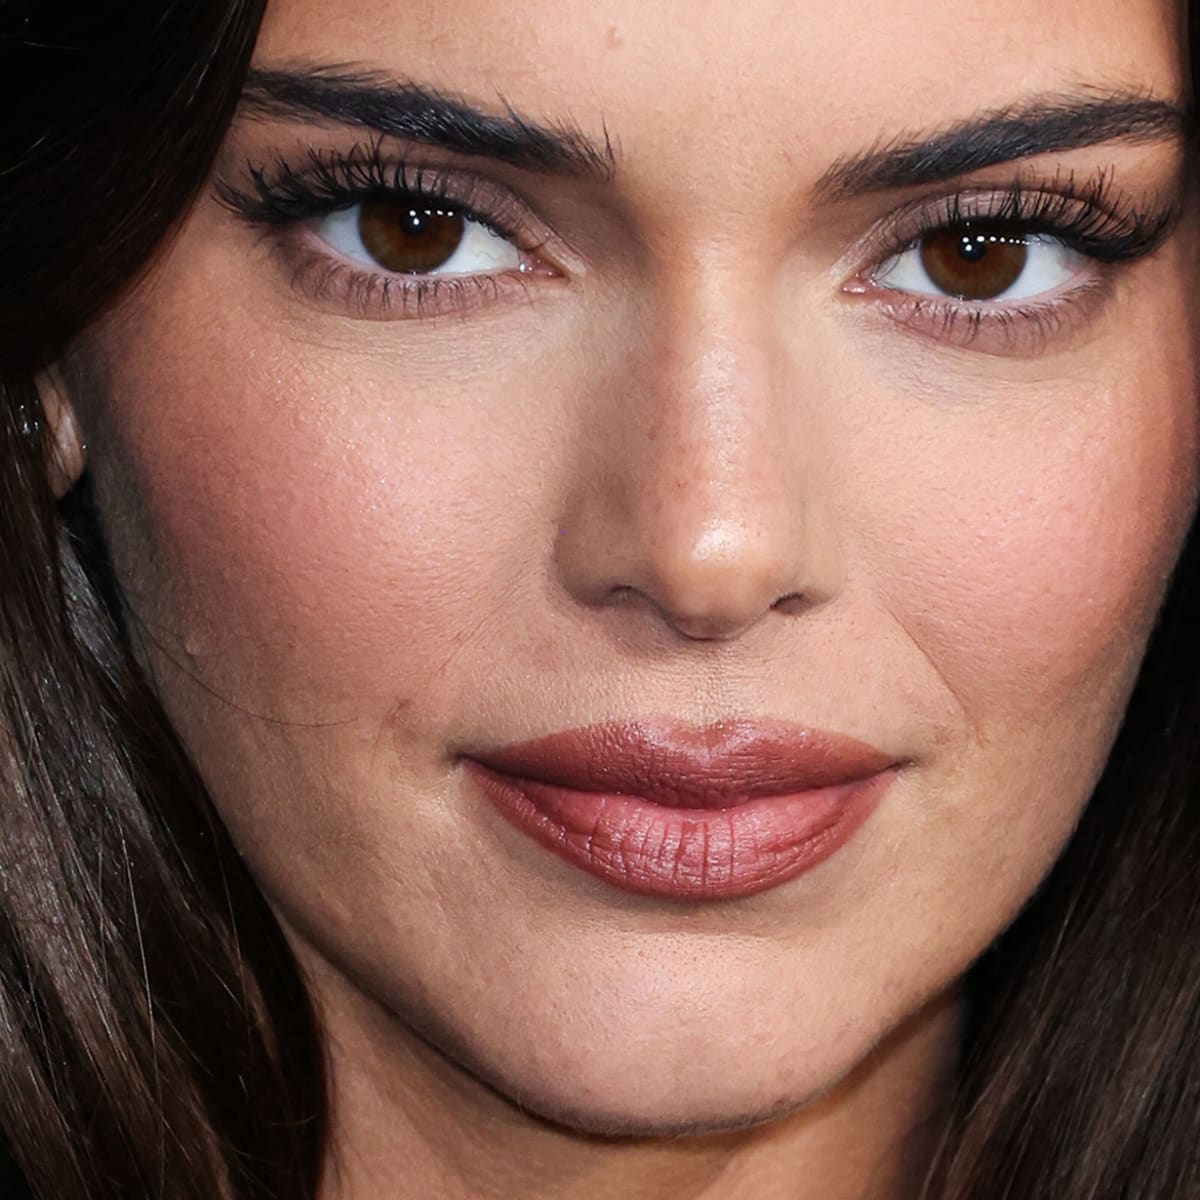 Kendall Jenner Before and After: From 2008 to 2022 - The Skincare Edit